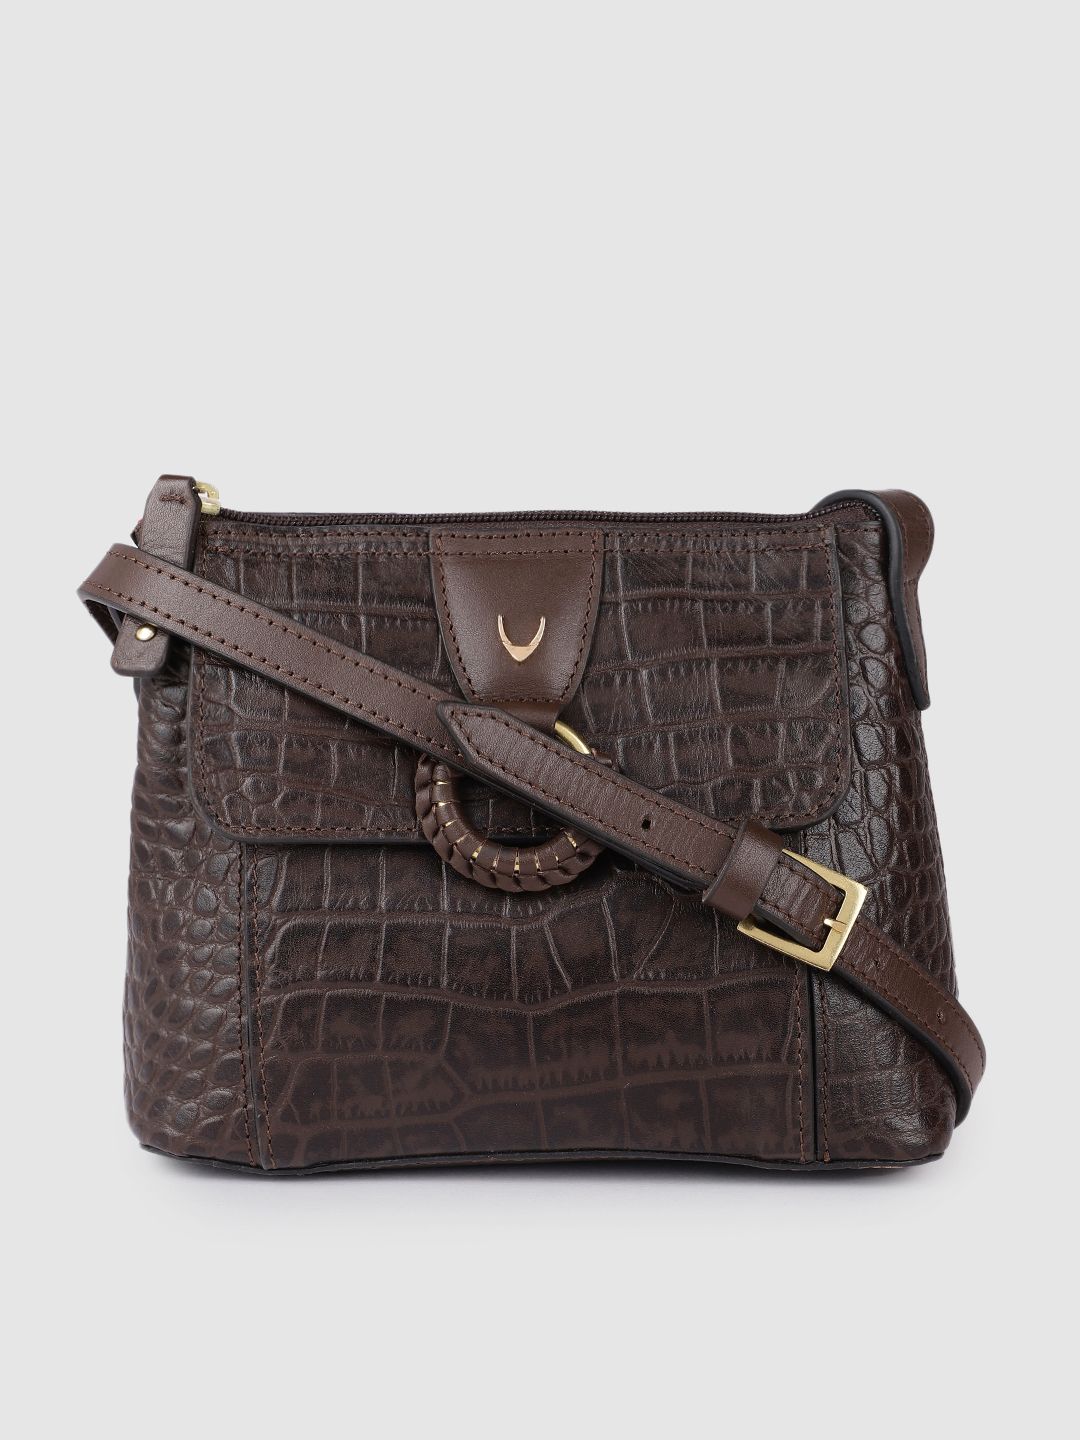 Hidesign Brown Textured Leather Sling Bag Price in India